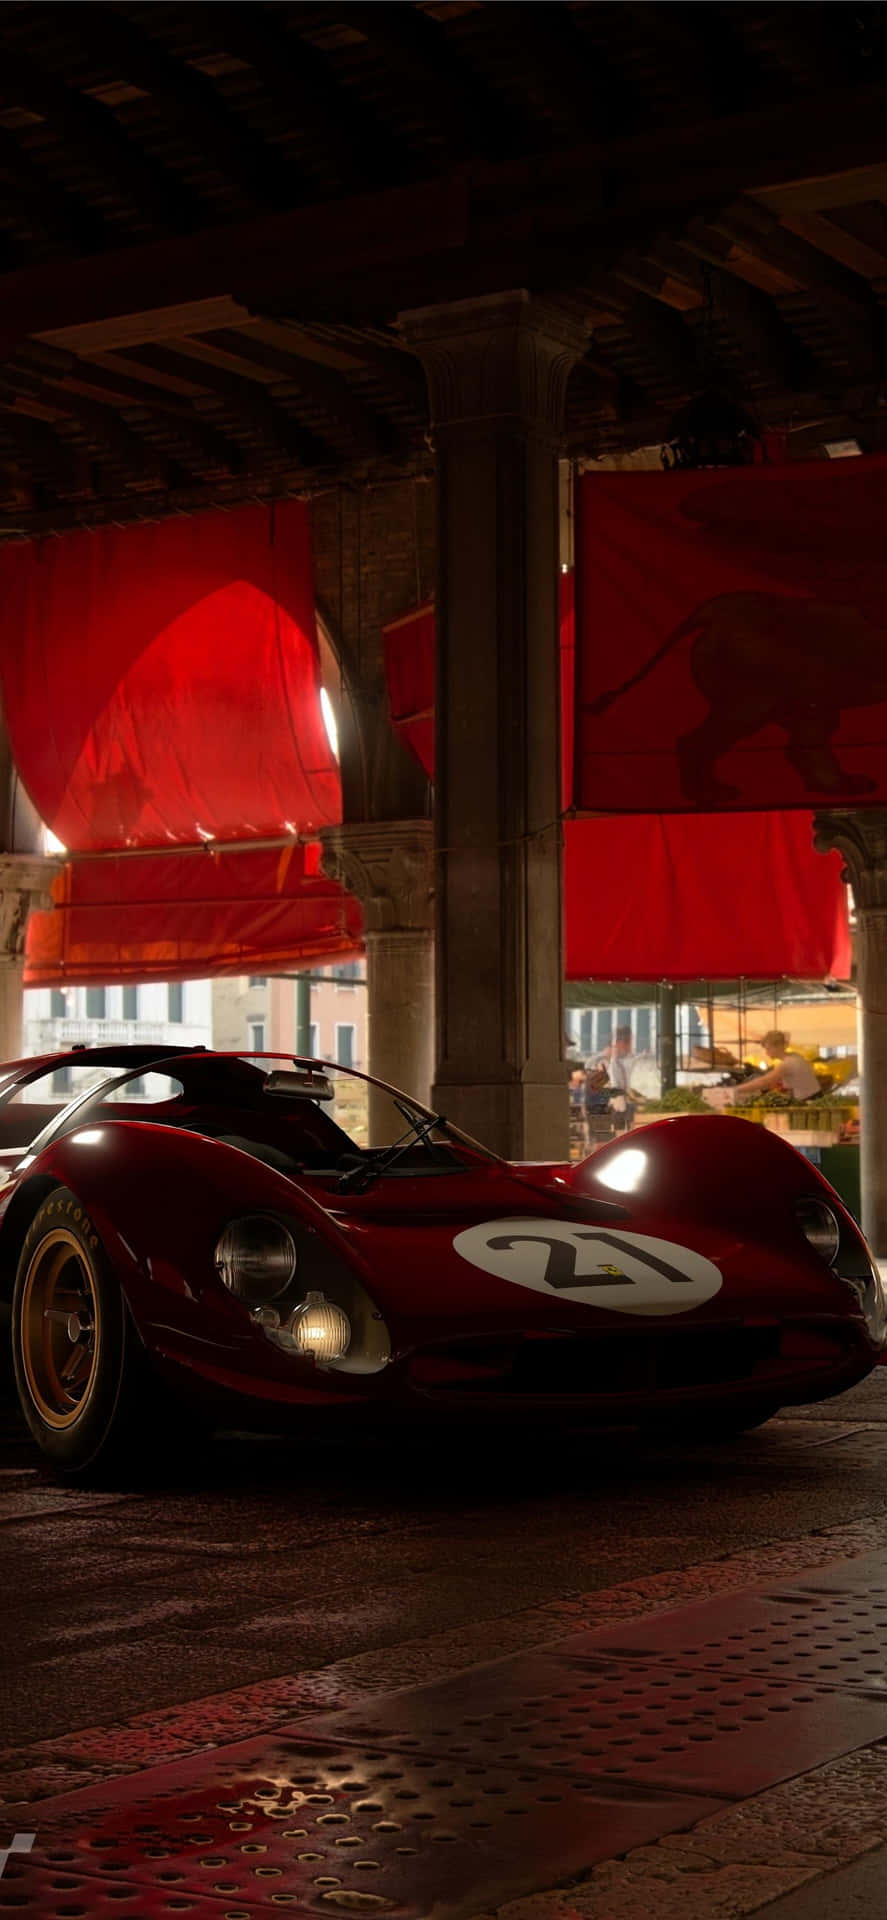 A Red Sports Car Parked Under A Red Canopy Wallpaper